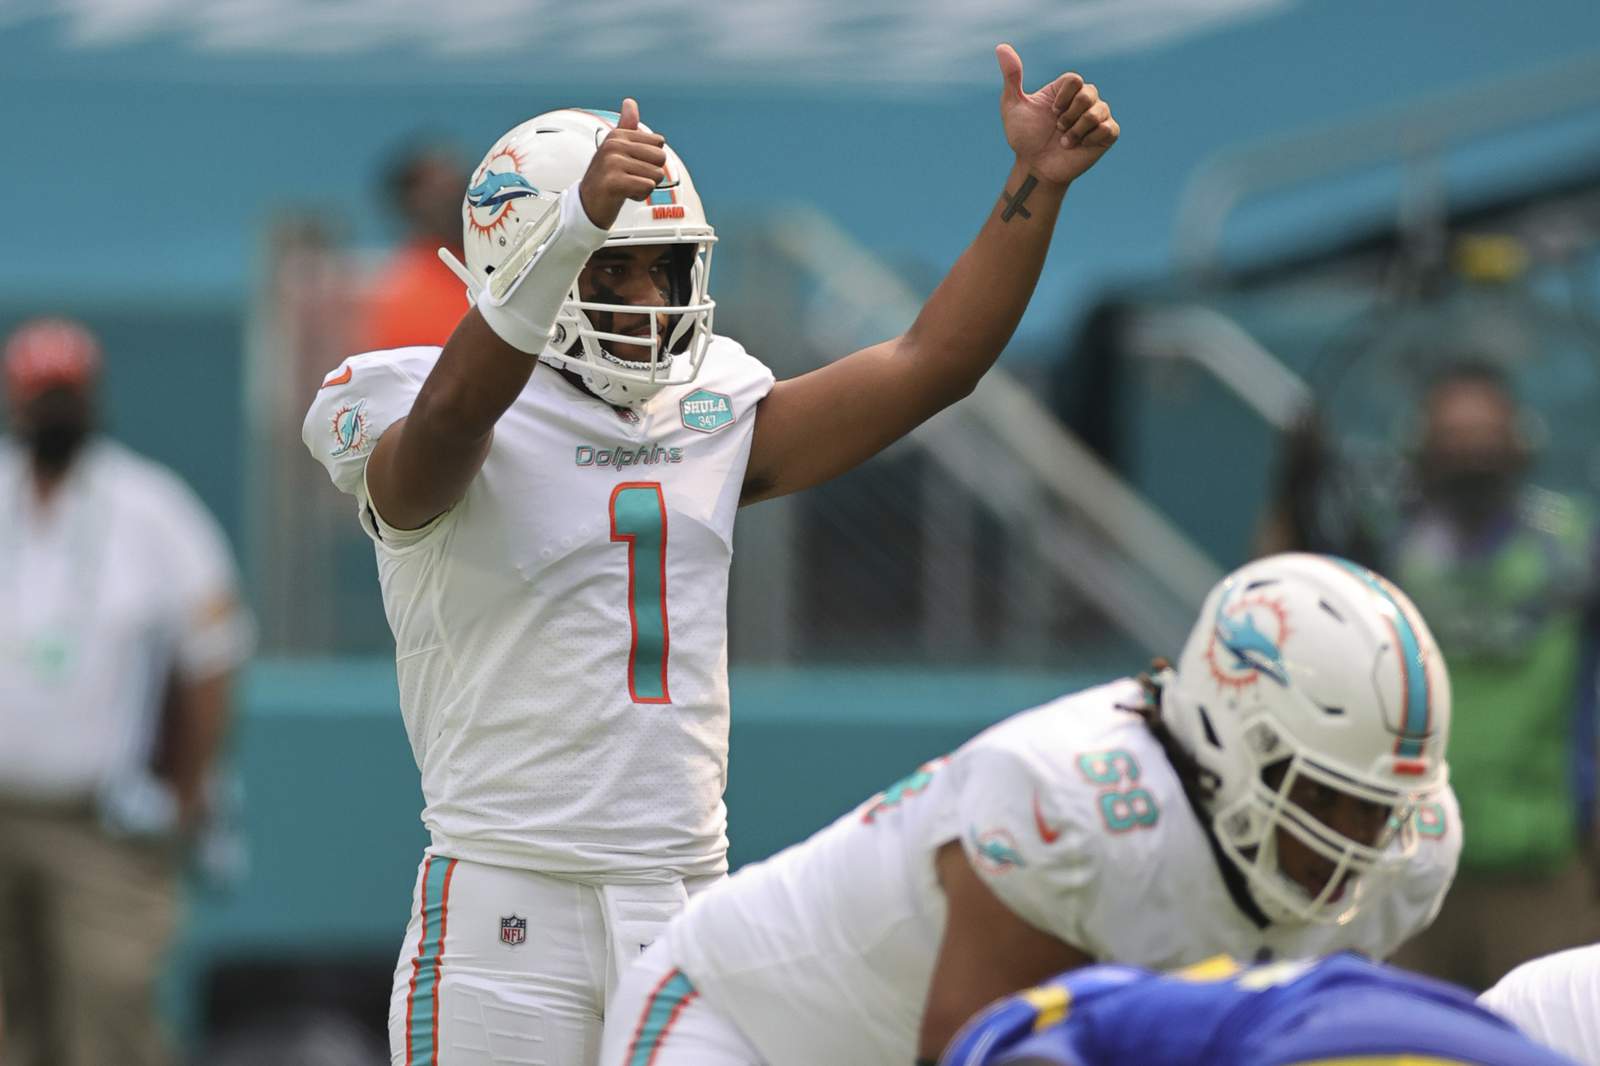 Dolphins vs. Chargers: How to watch, stream, listen